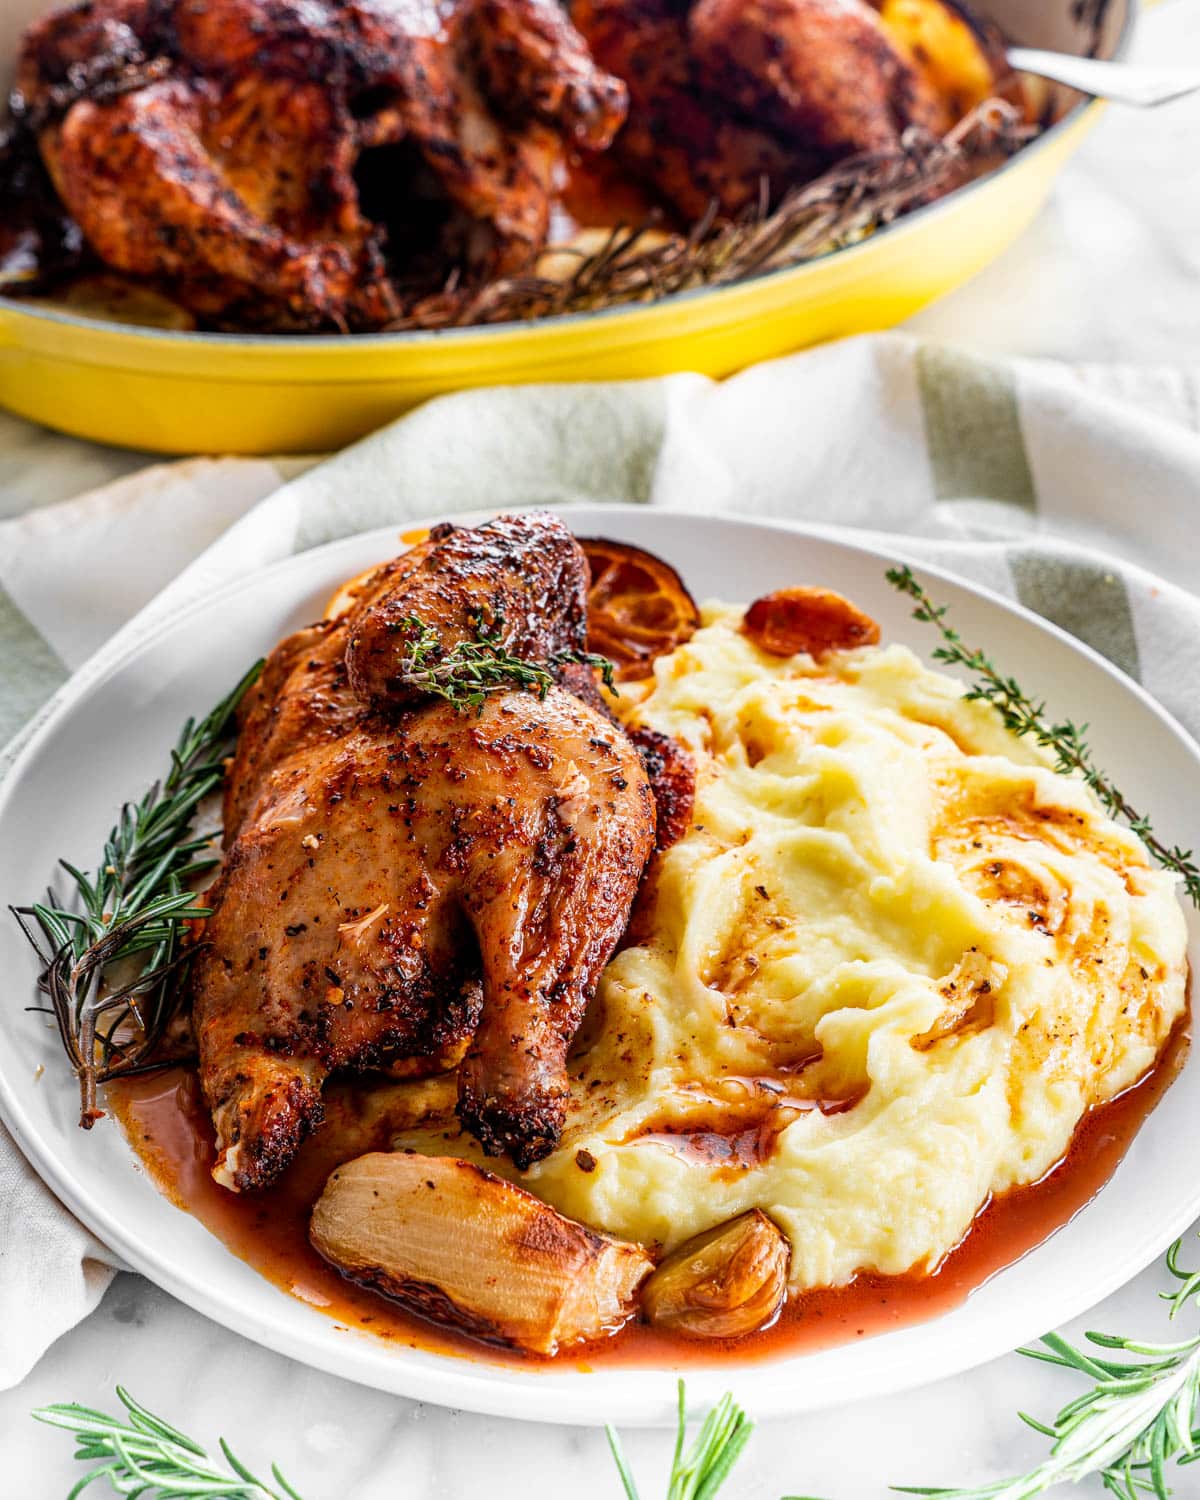 Delicious and Creative Ways to Use Leftover Rotisserie Chicken: A Culinary Guide for Making the Most of Your Meal